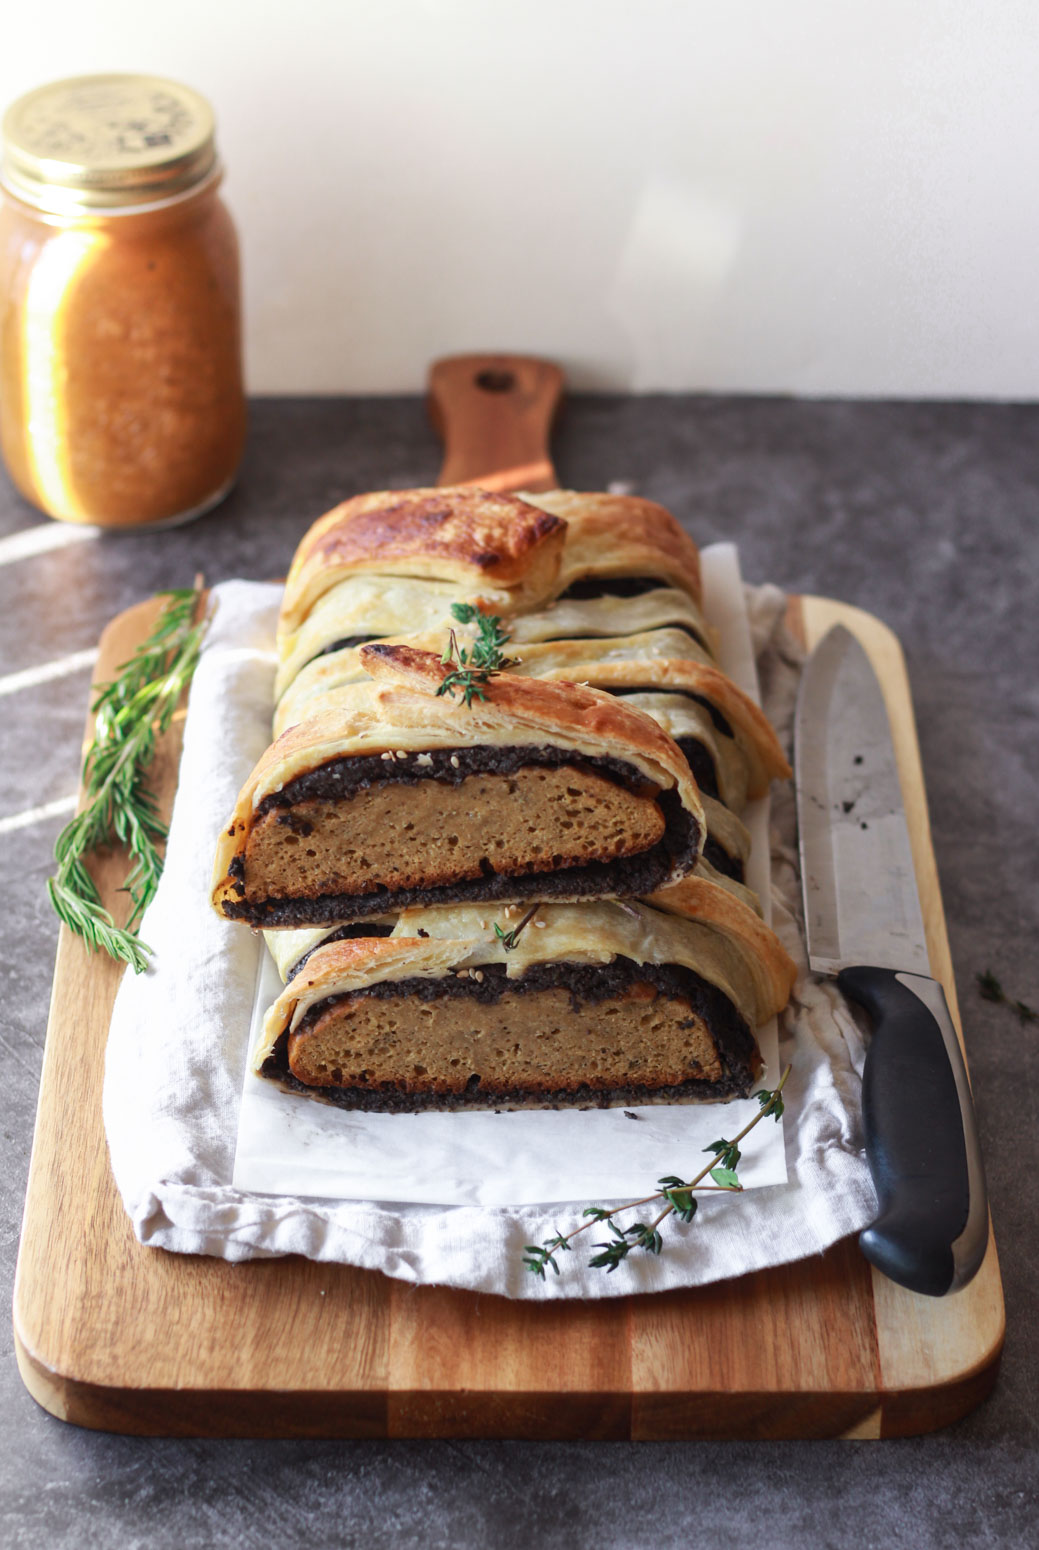 This vegan seitan wellington makes a stunning centerpiece for your holiday dinner table.